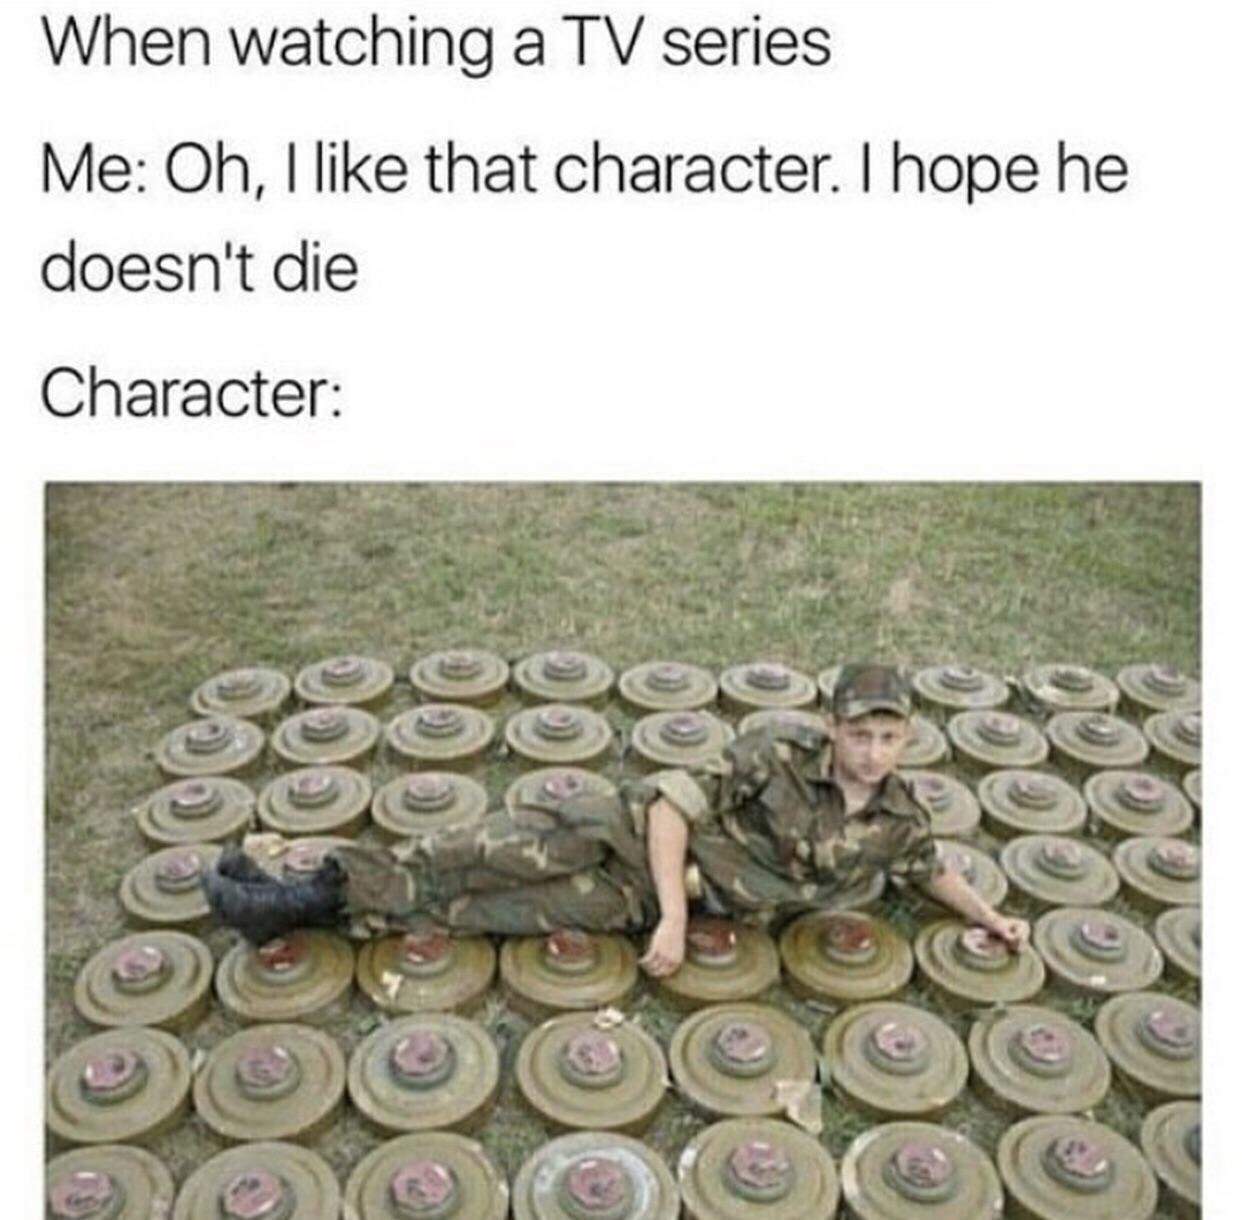 memes - tv series memes - When watching a Tv series Me Oh, I that character. I hope he doesn't die Character 8888 Doce Ooooc